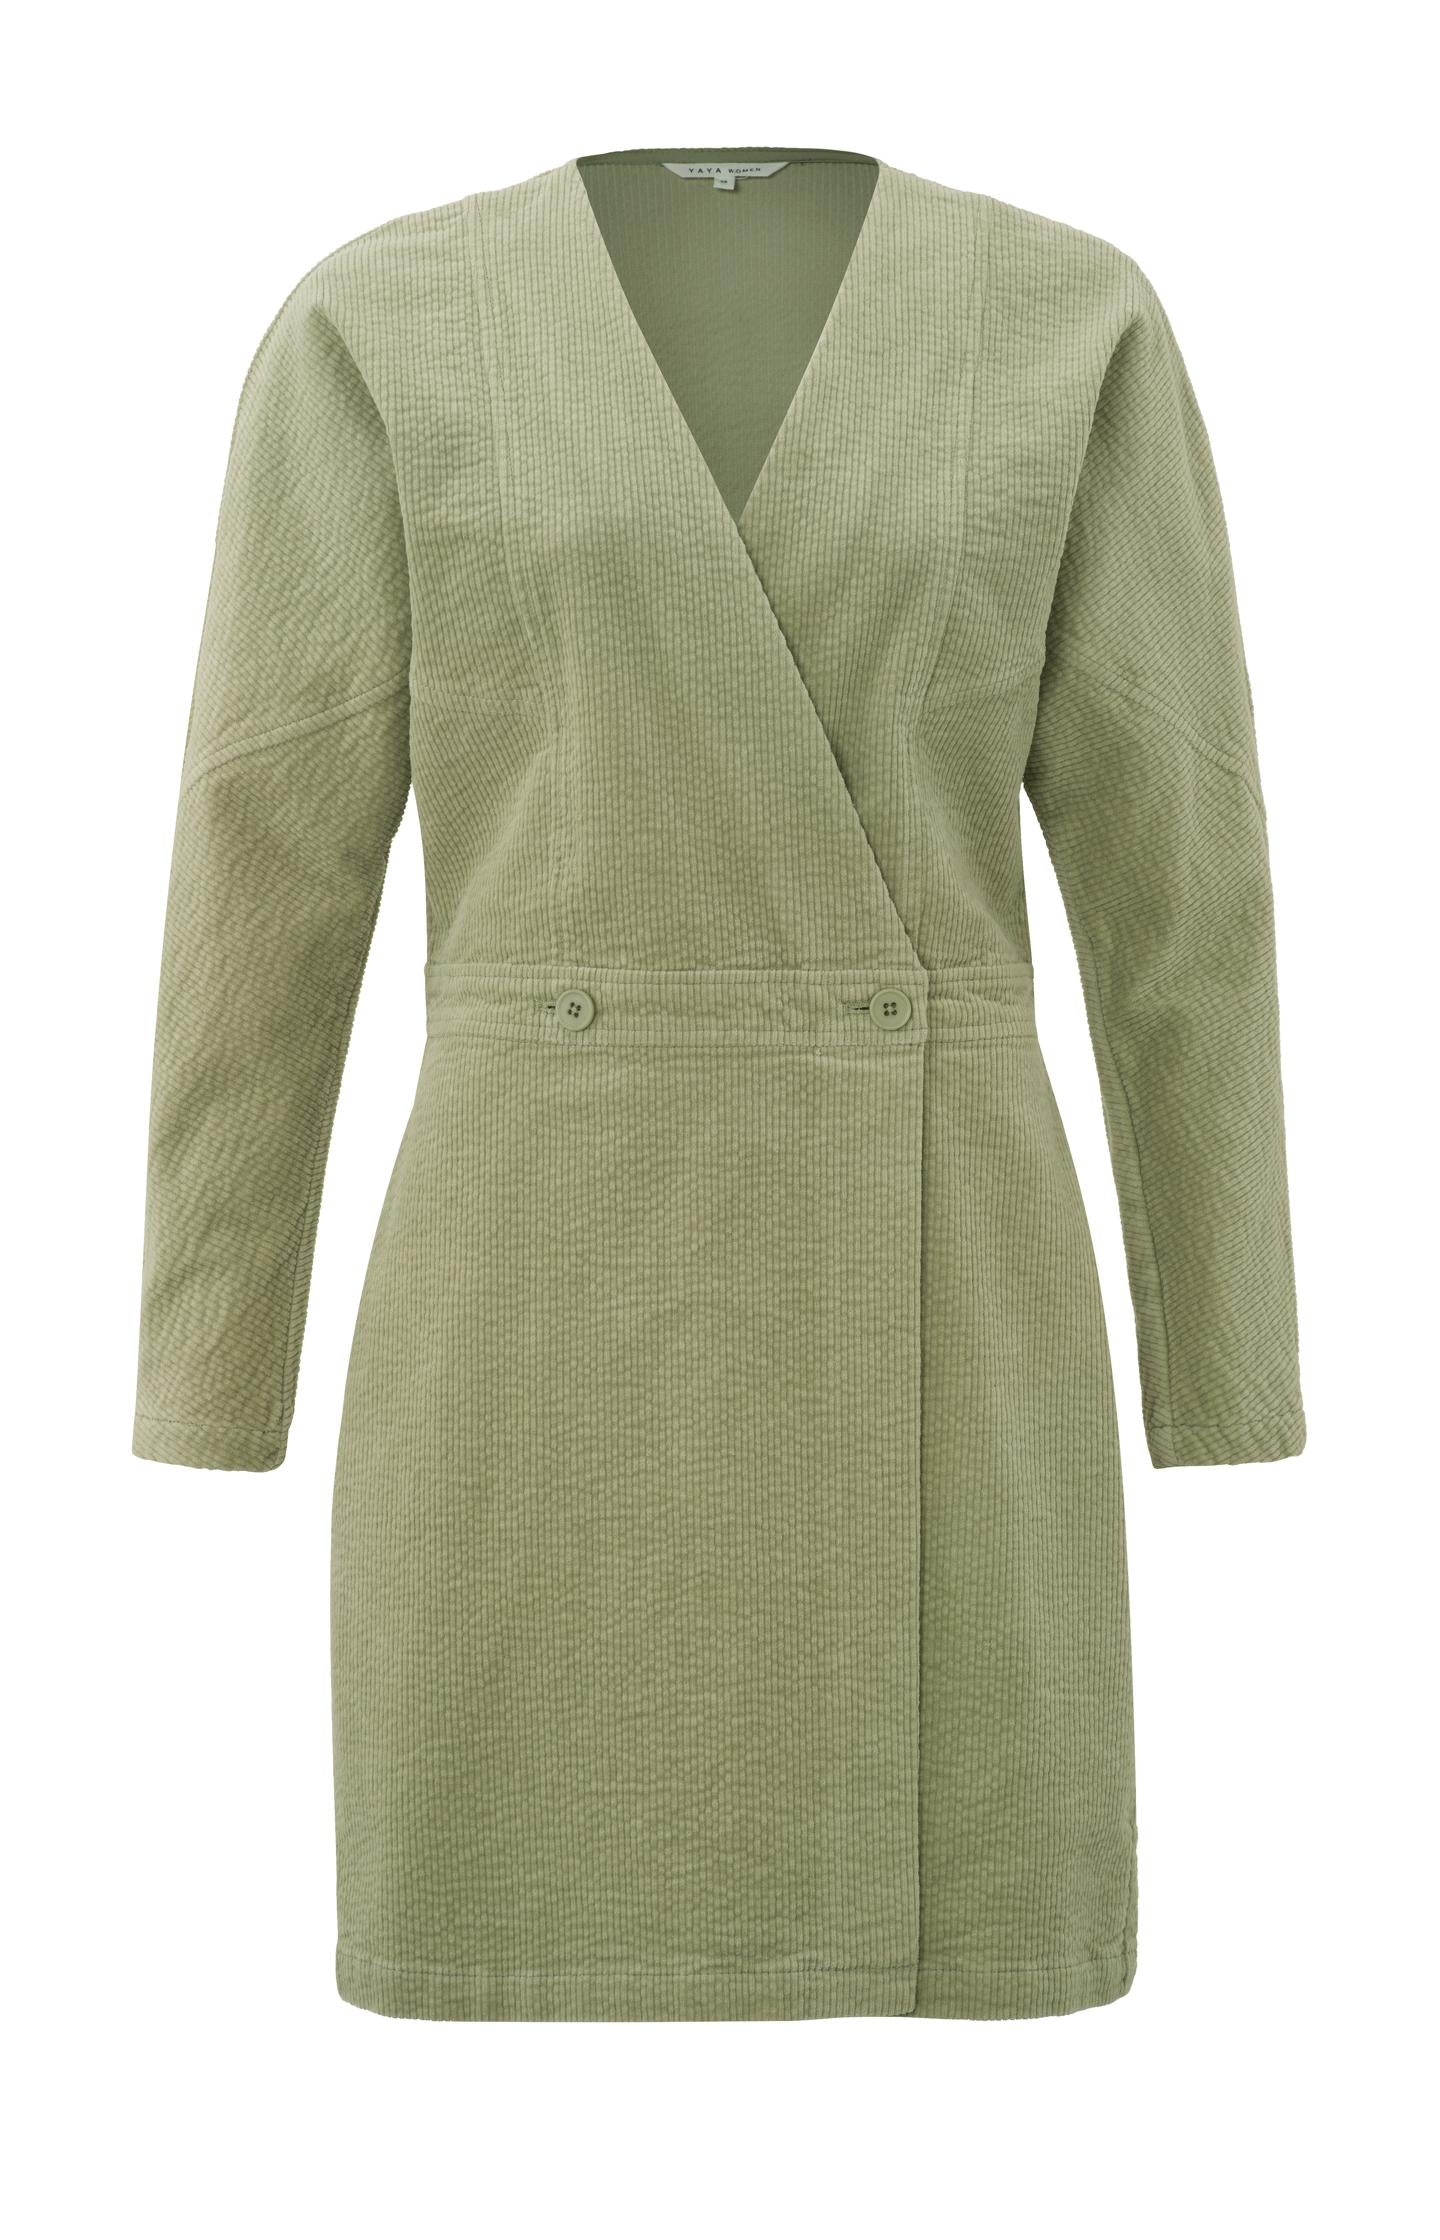 Wrap dress with V-neck, long sleeves and seam details - Type: product